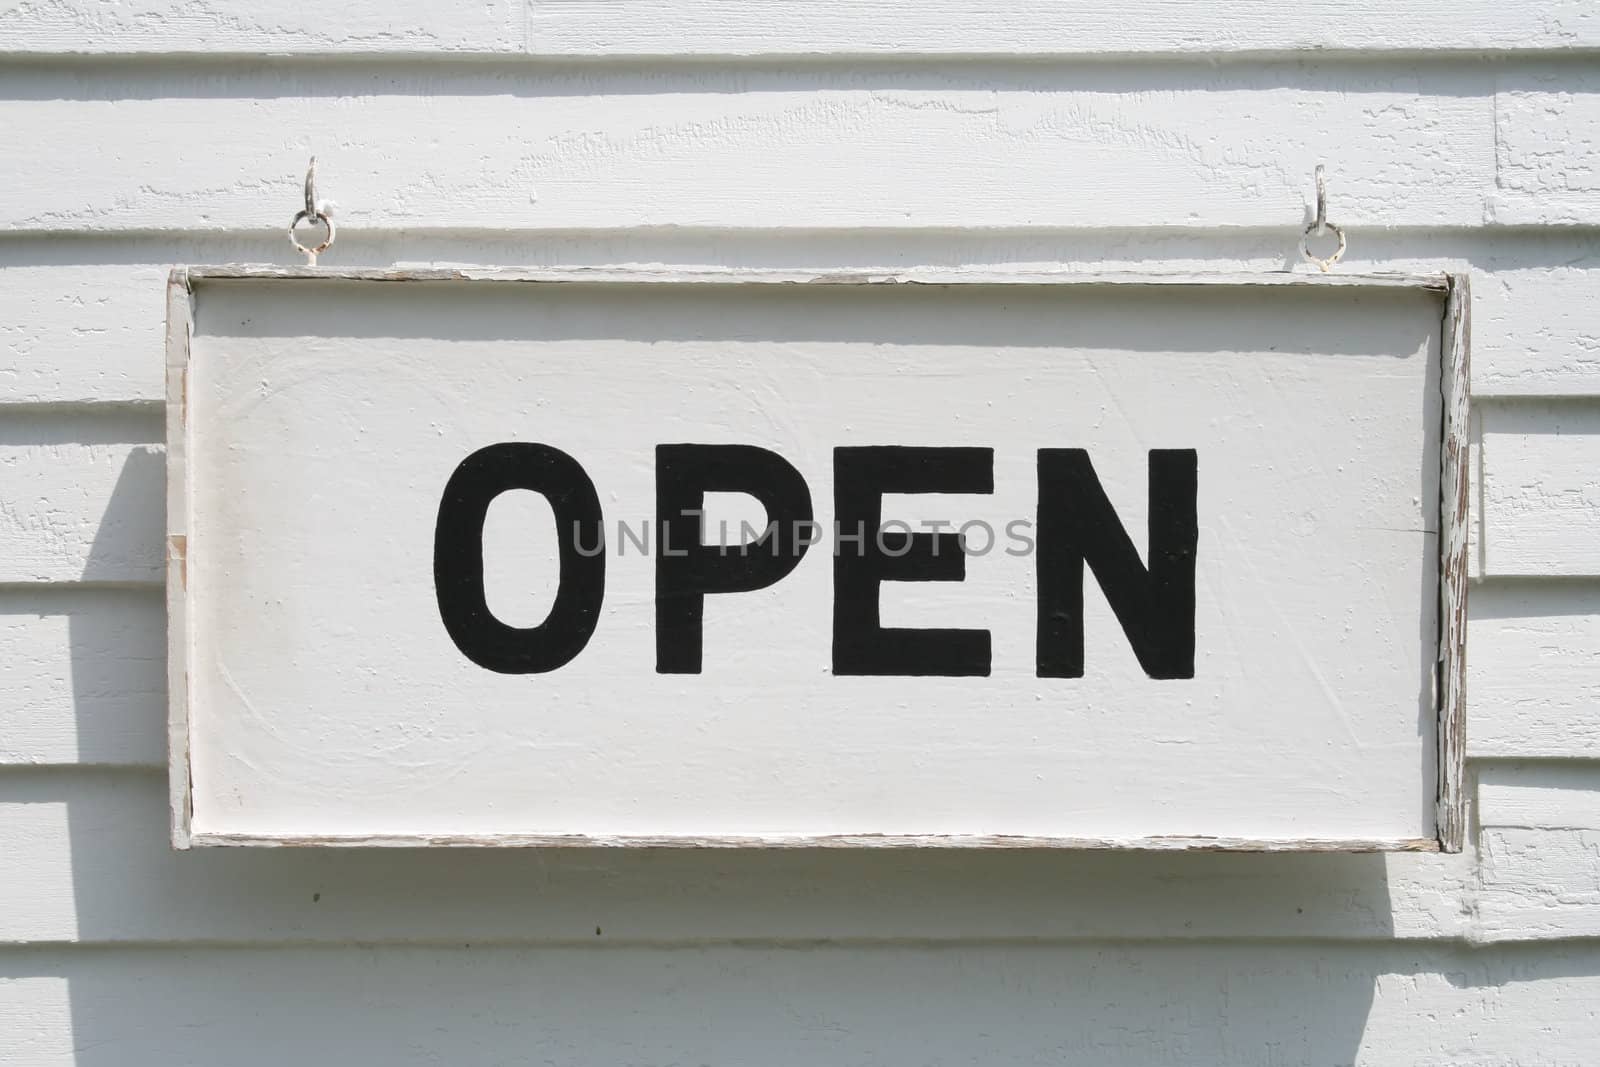 A welcoming old Open sign, black letters on white background